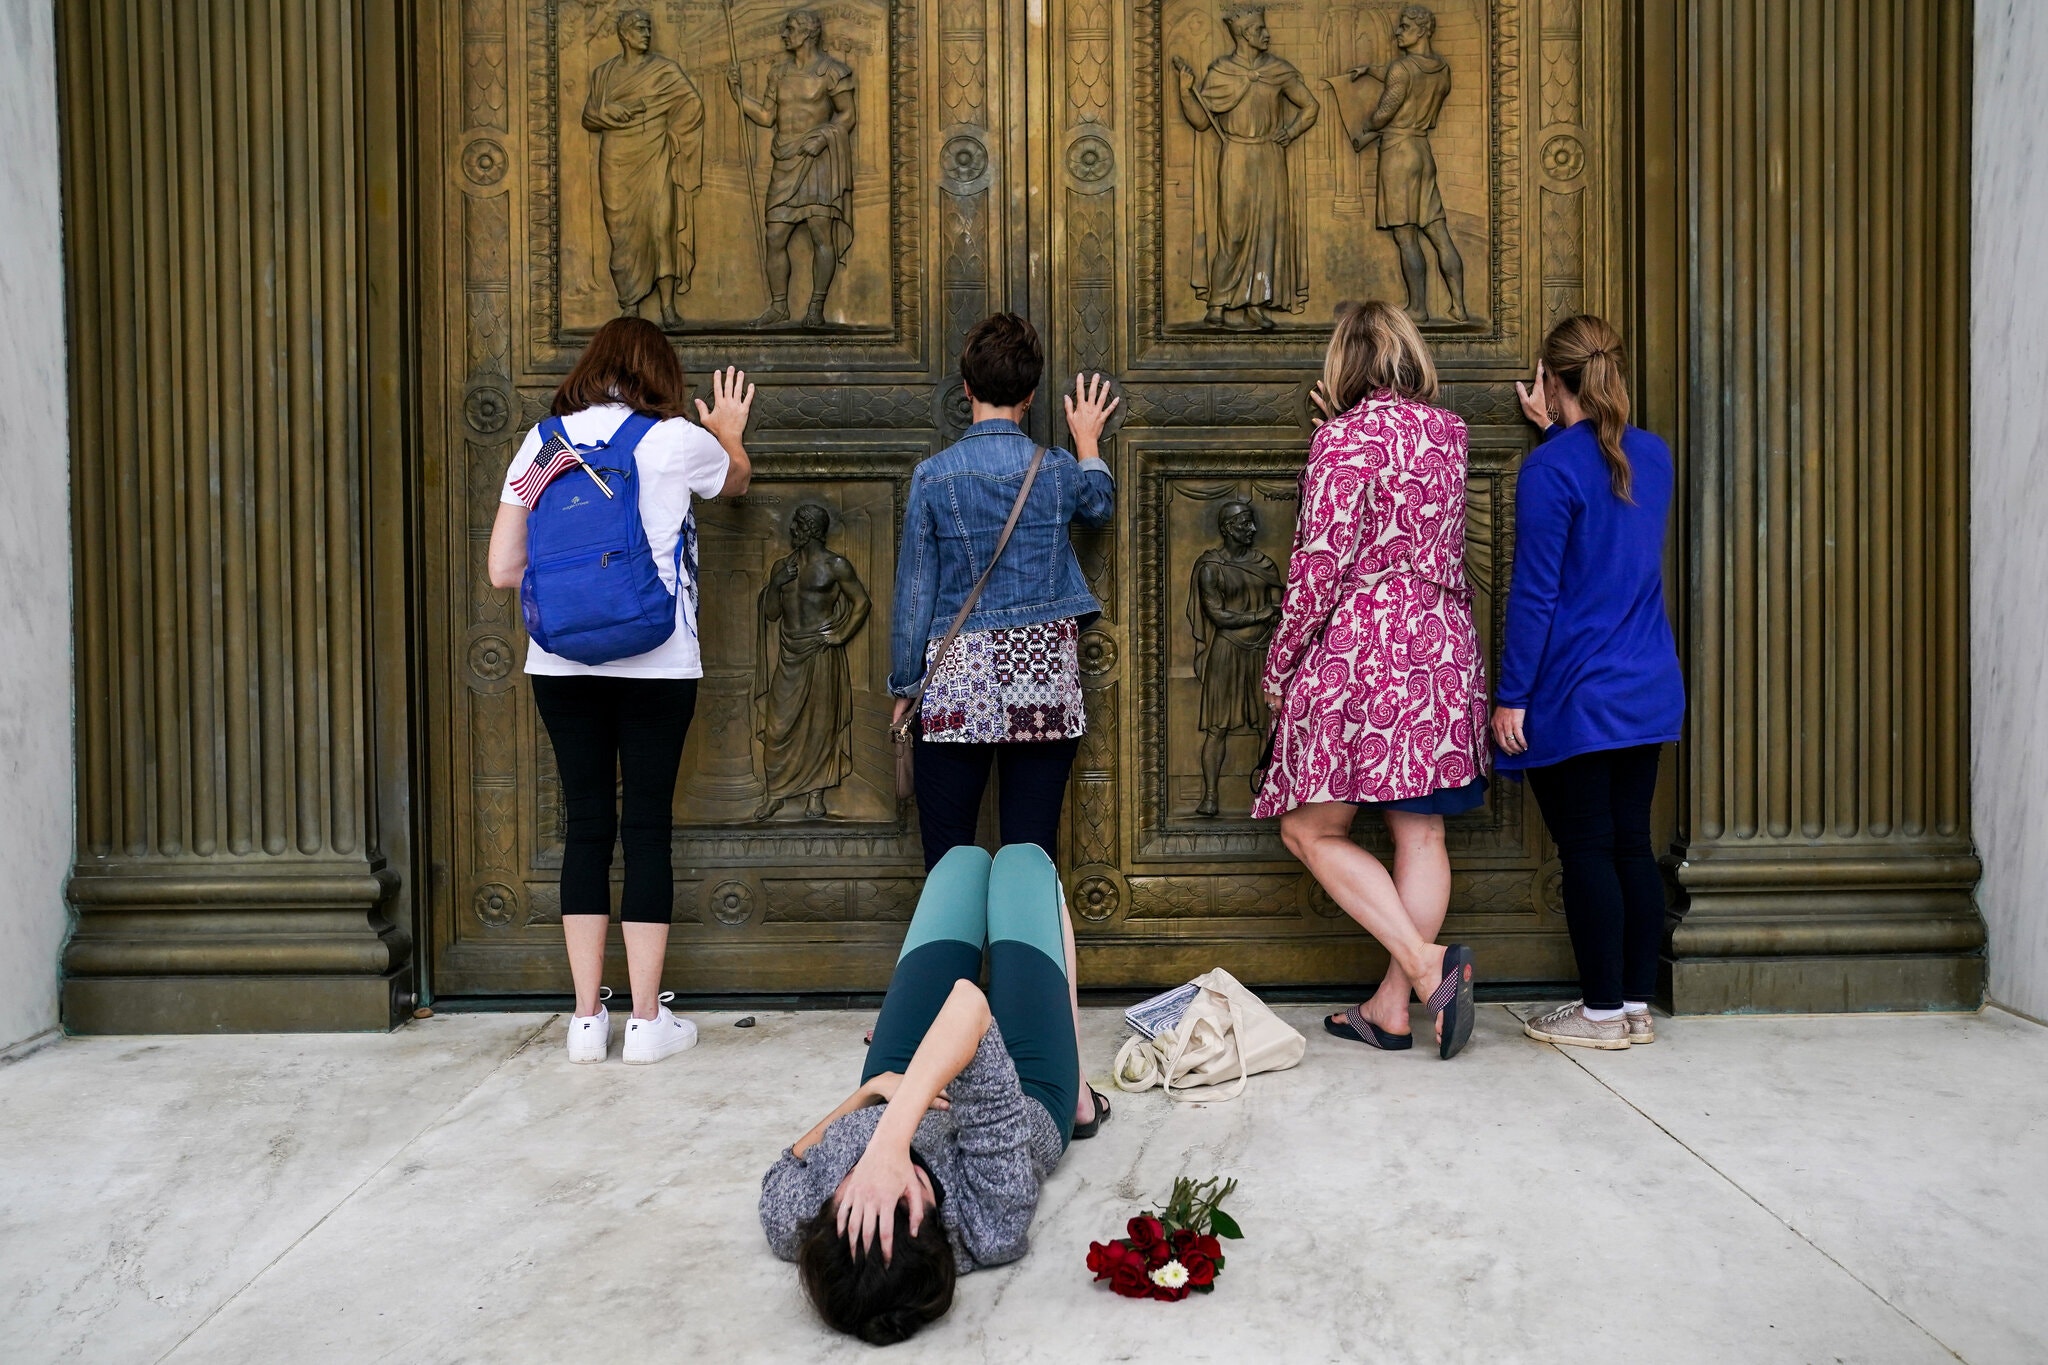 Erin Schaff/New York Times Conservative women, who support Judge Amy Coney Barrett’s nomination to the Supreme Court, pray while touching the doors of the Court as Jacquelyn Booth cries on the ground, mourning the death of Justice Ruth Bader Ginsburg.